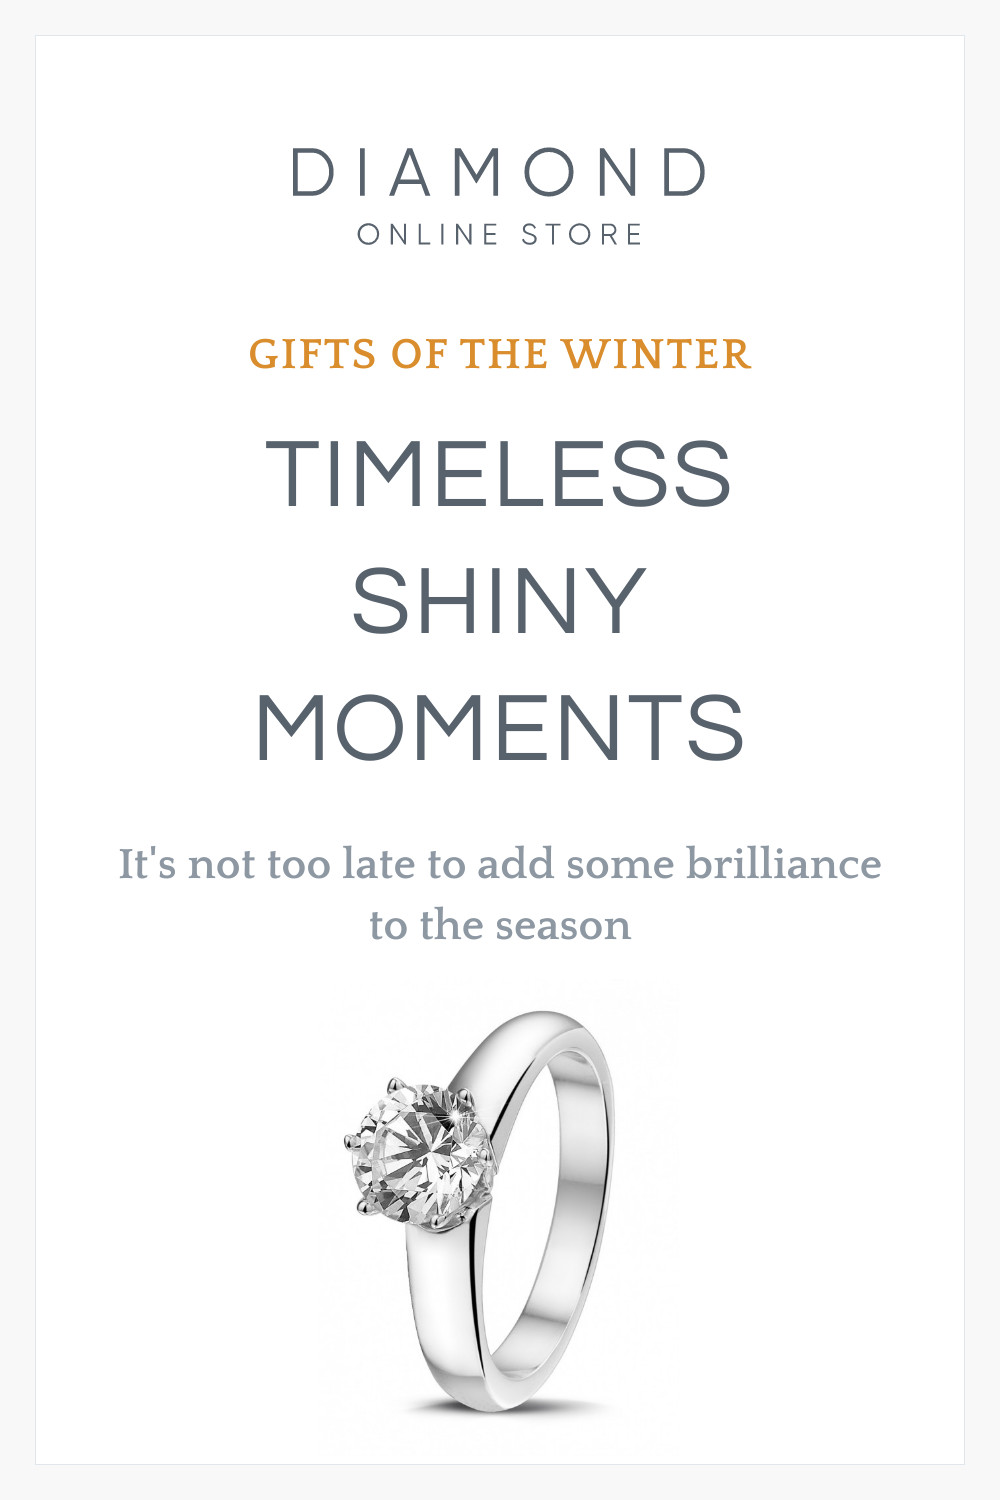 Timeless Shiny Jewelry Moments Inline Rectangle 300x250